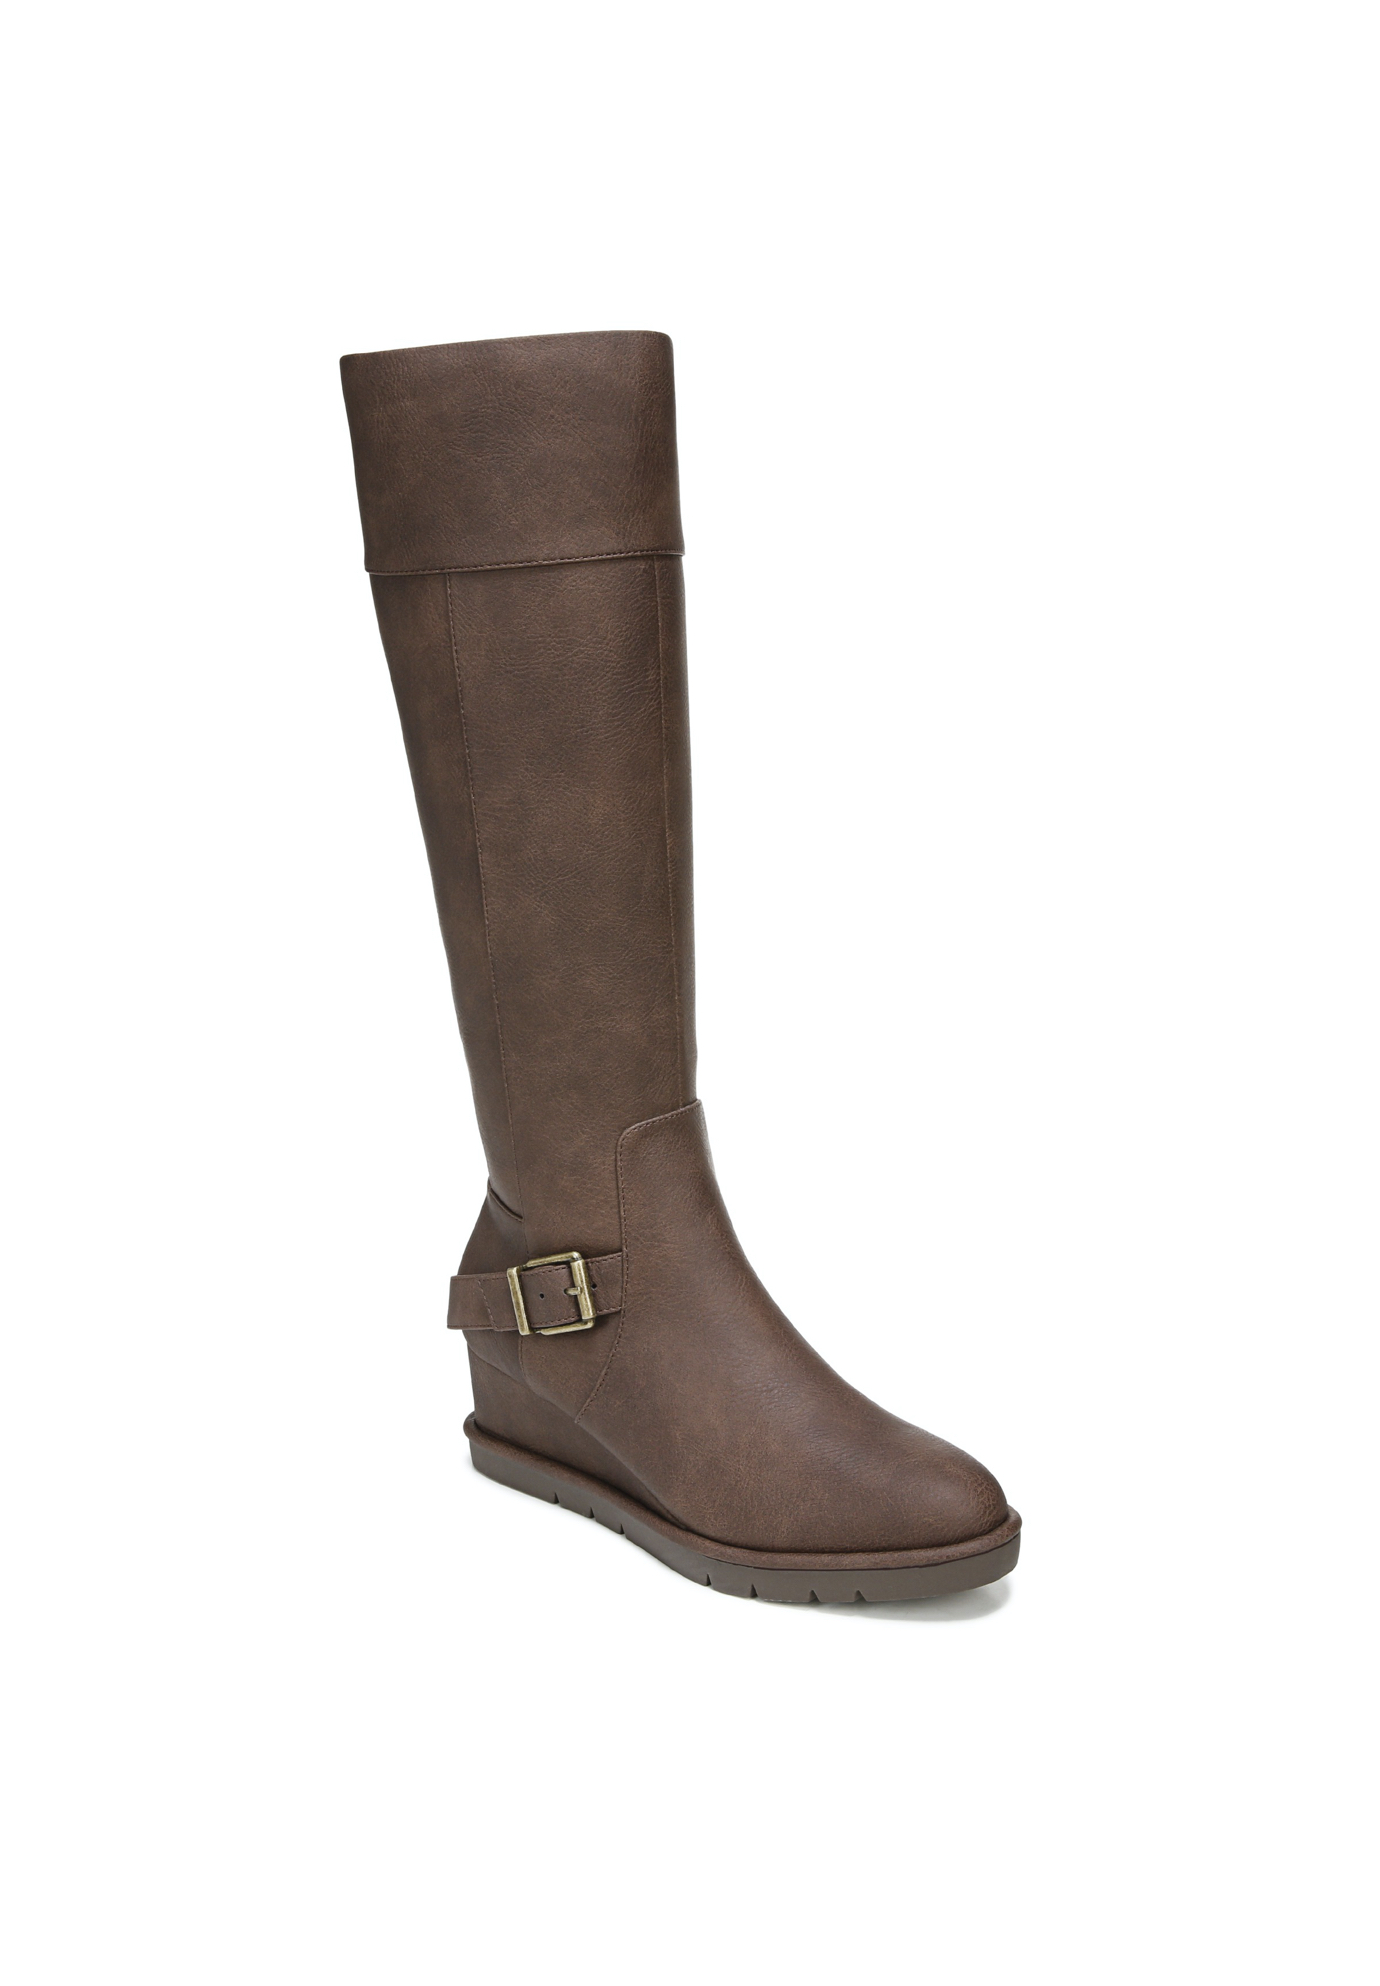 Shana Water Resistant Tall Boot, 